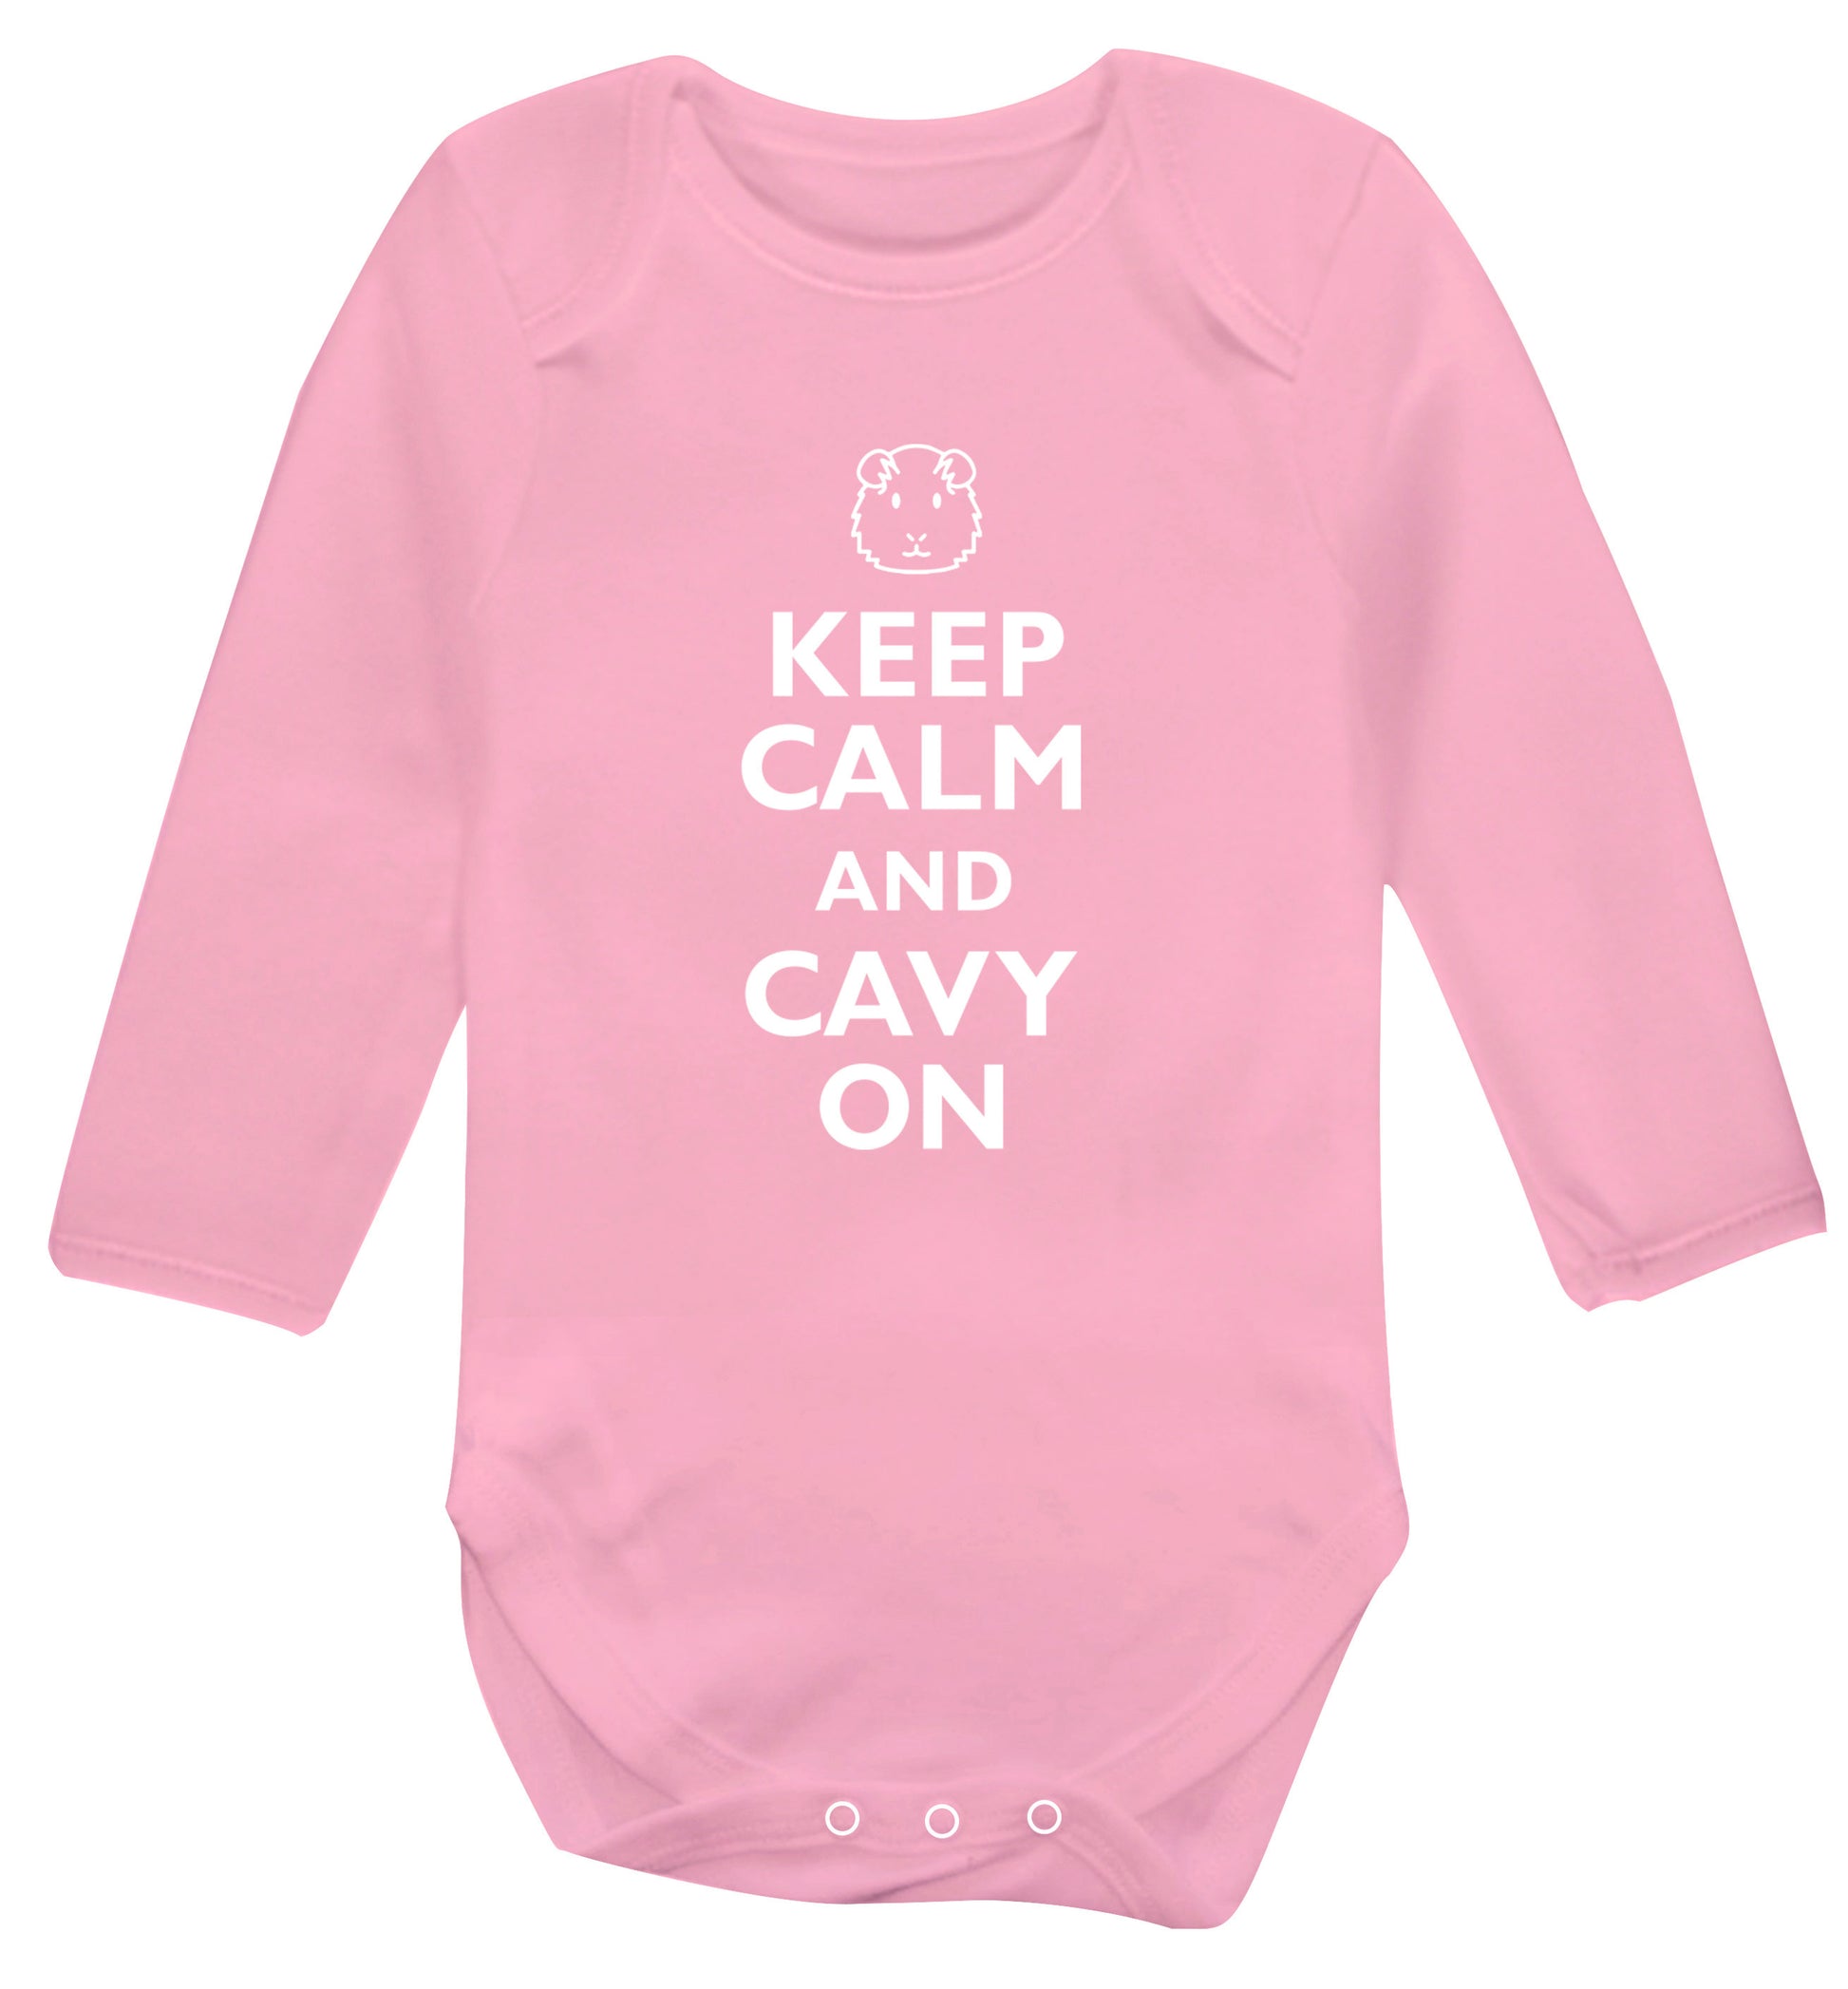 Keep calm and cavvy on Baby Vest long sleeved pale pink 6-12 months